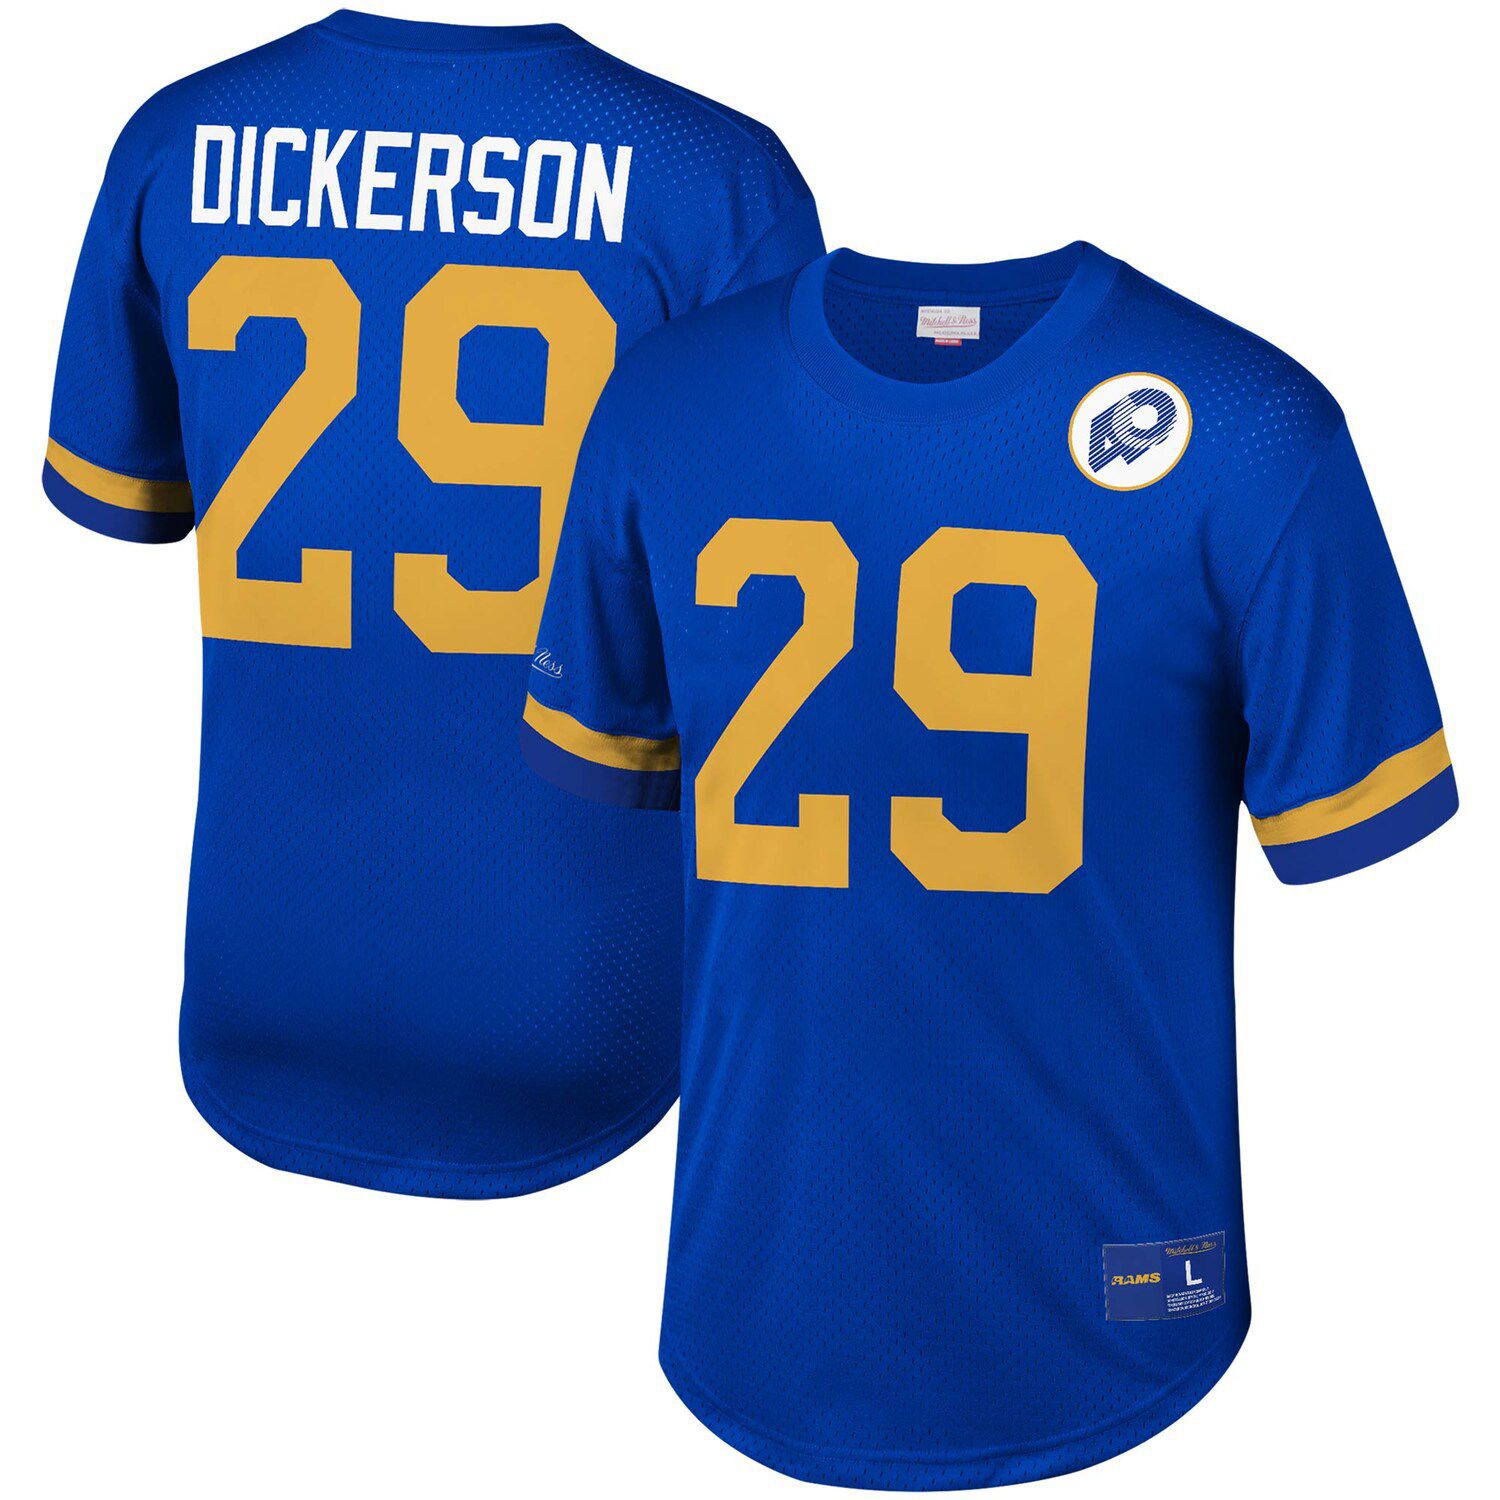 Los Angeles Rams retired number jersey